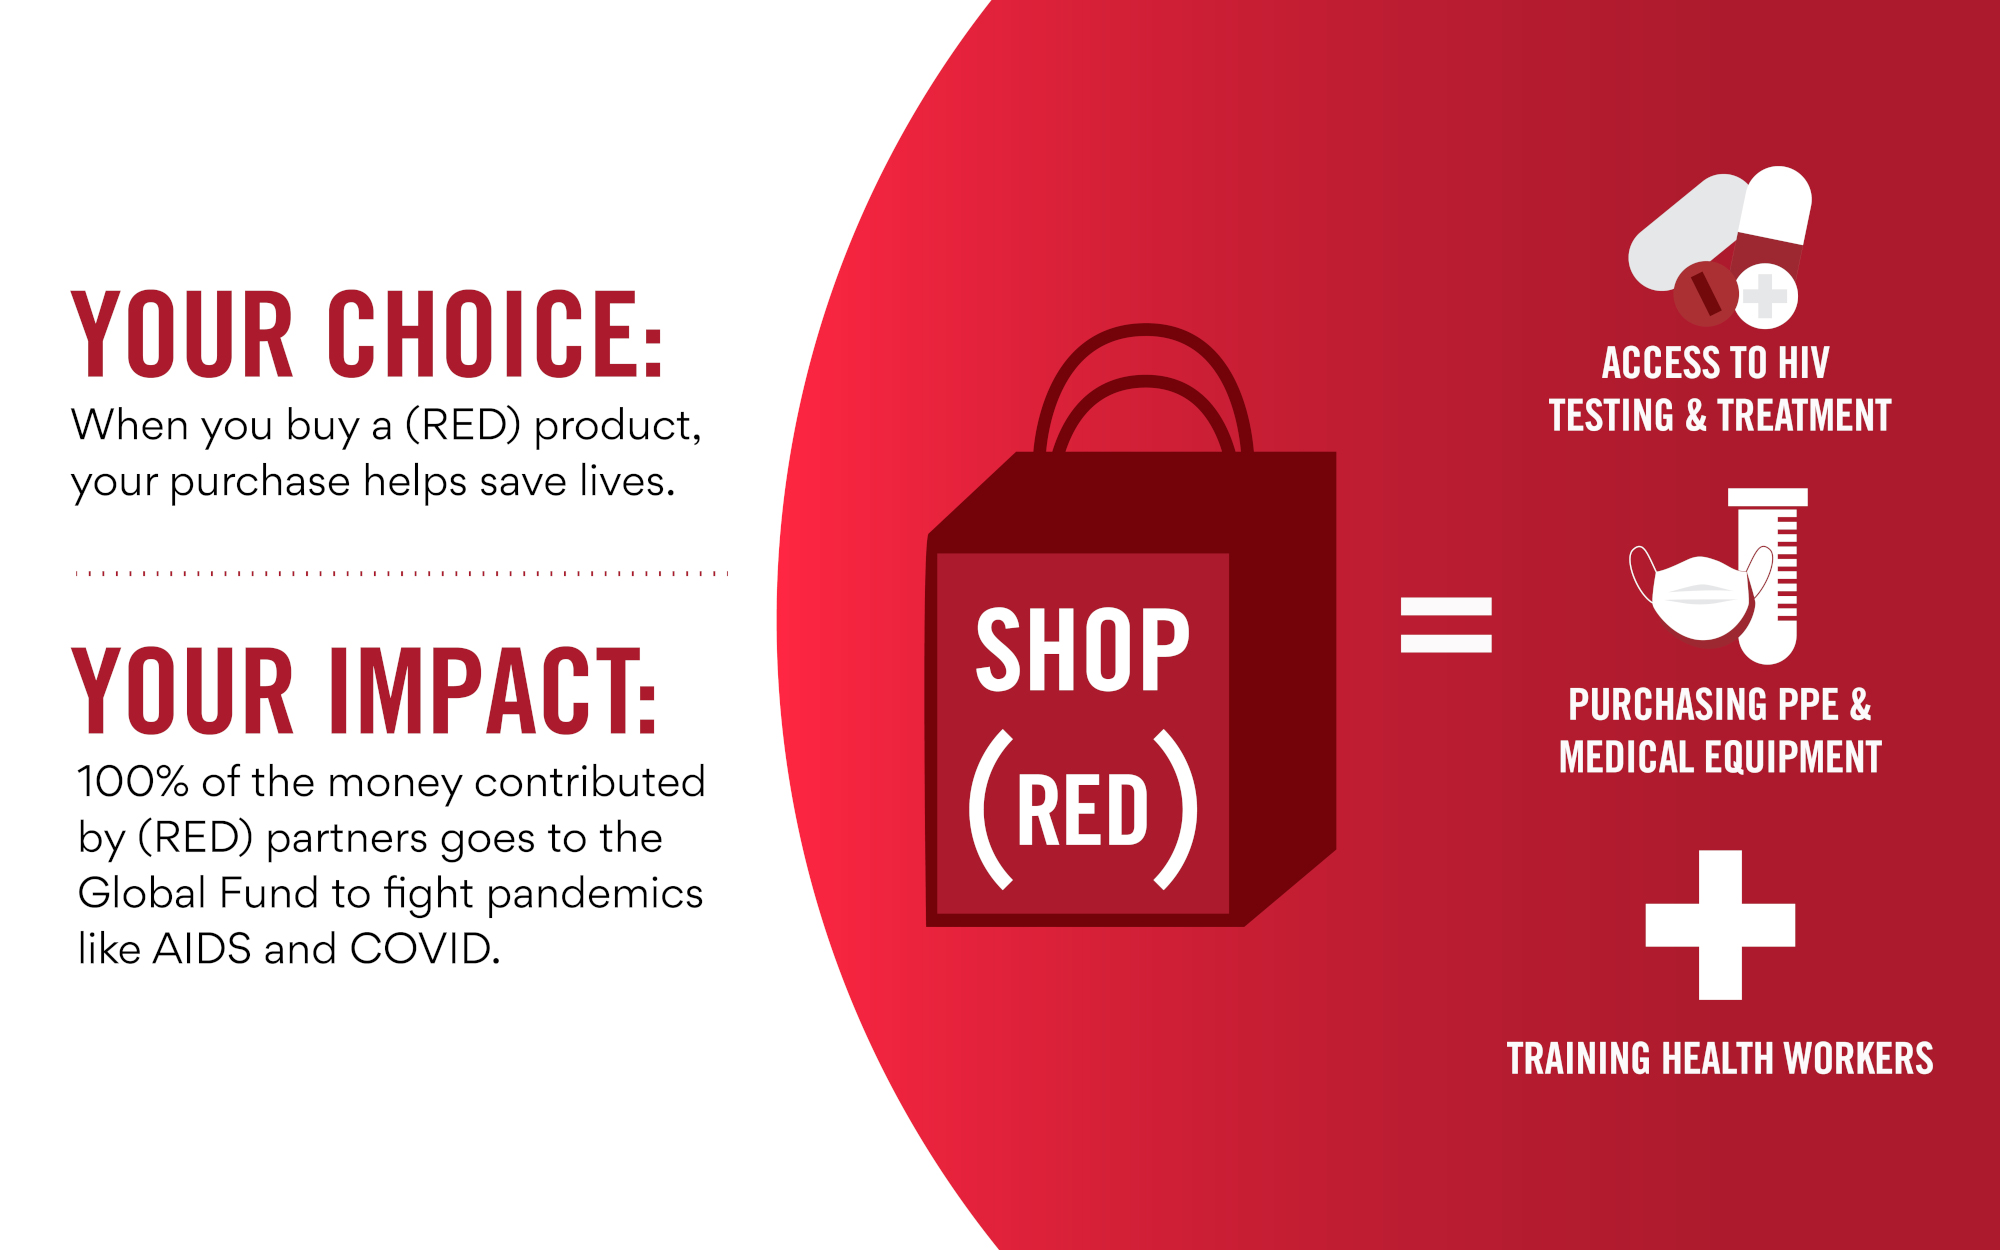 RED) - Sector (including Foundations) - The Global Fund to Fight AIDS, Tuberculosis and Malaria